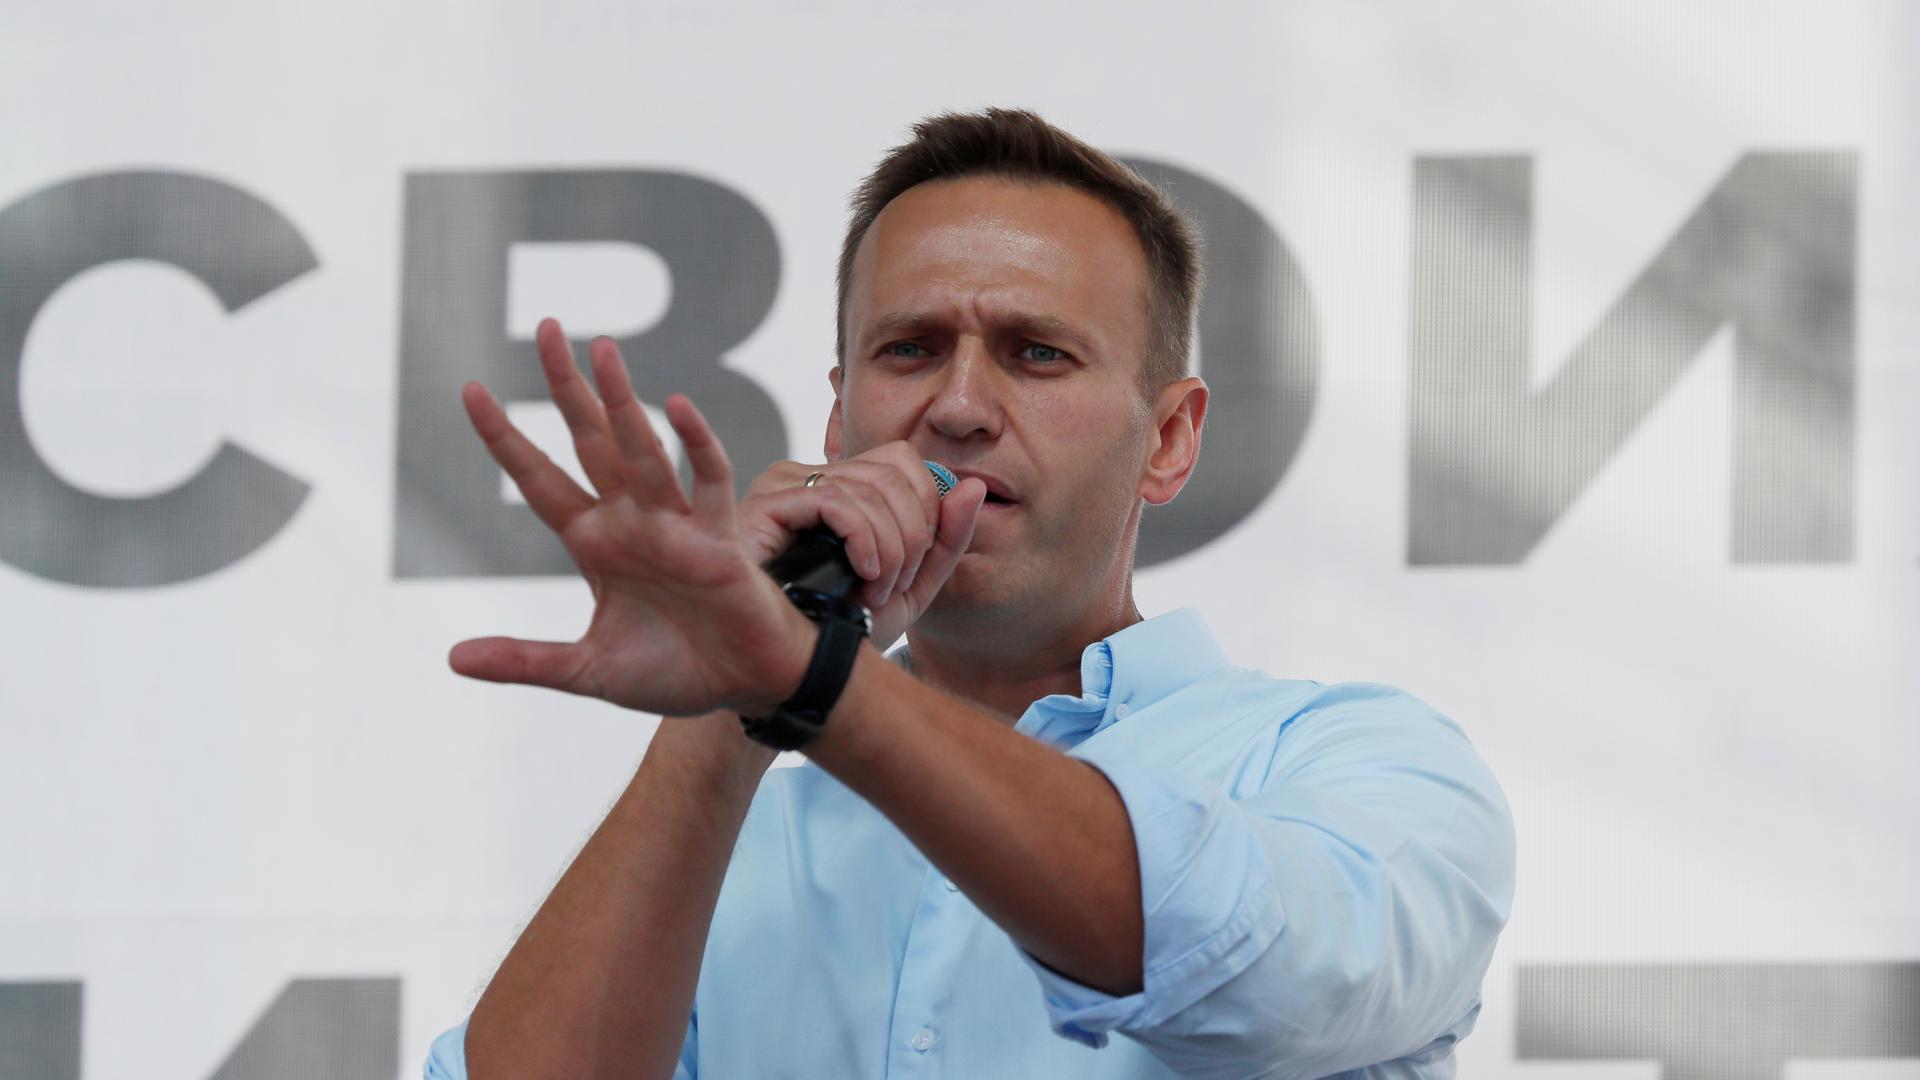 A man wearing a white shirt speaks on a microphone while gesturing with his hands.